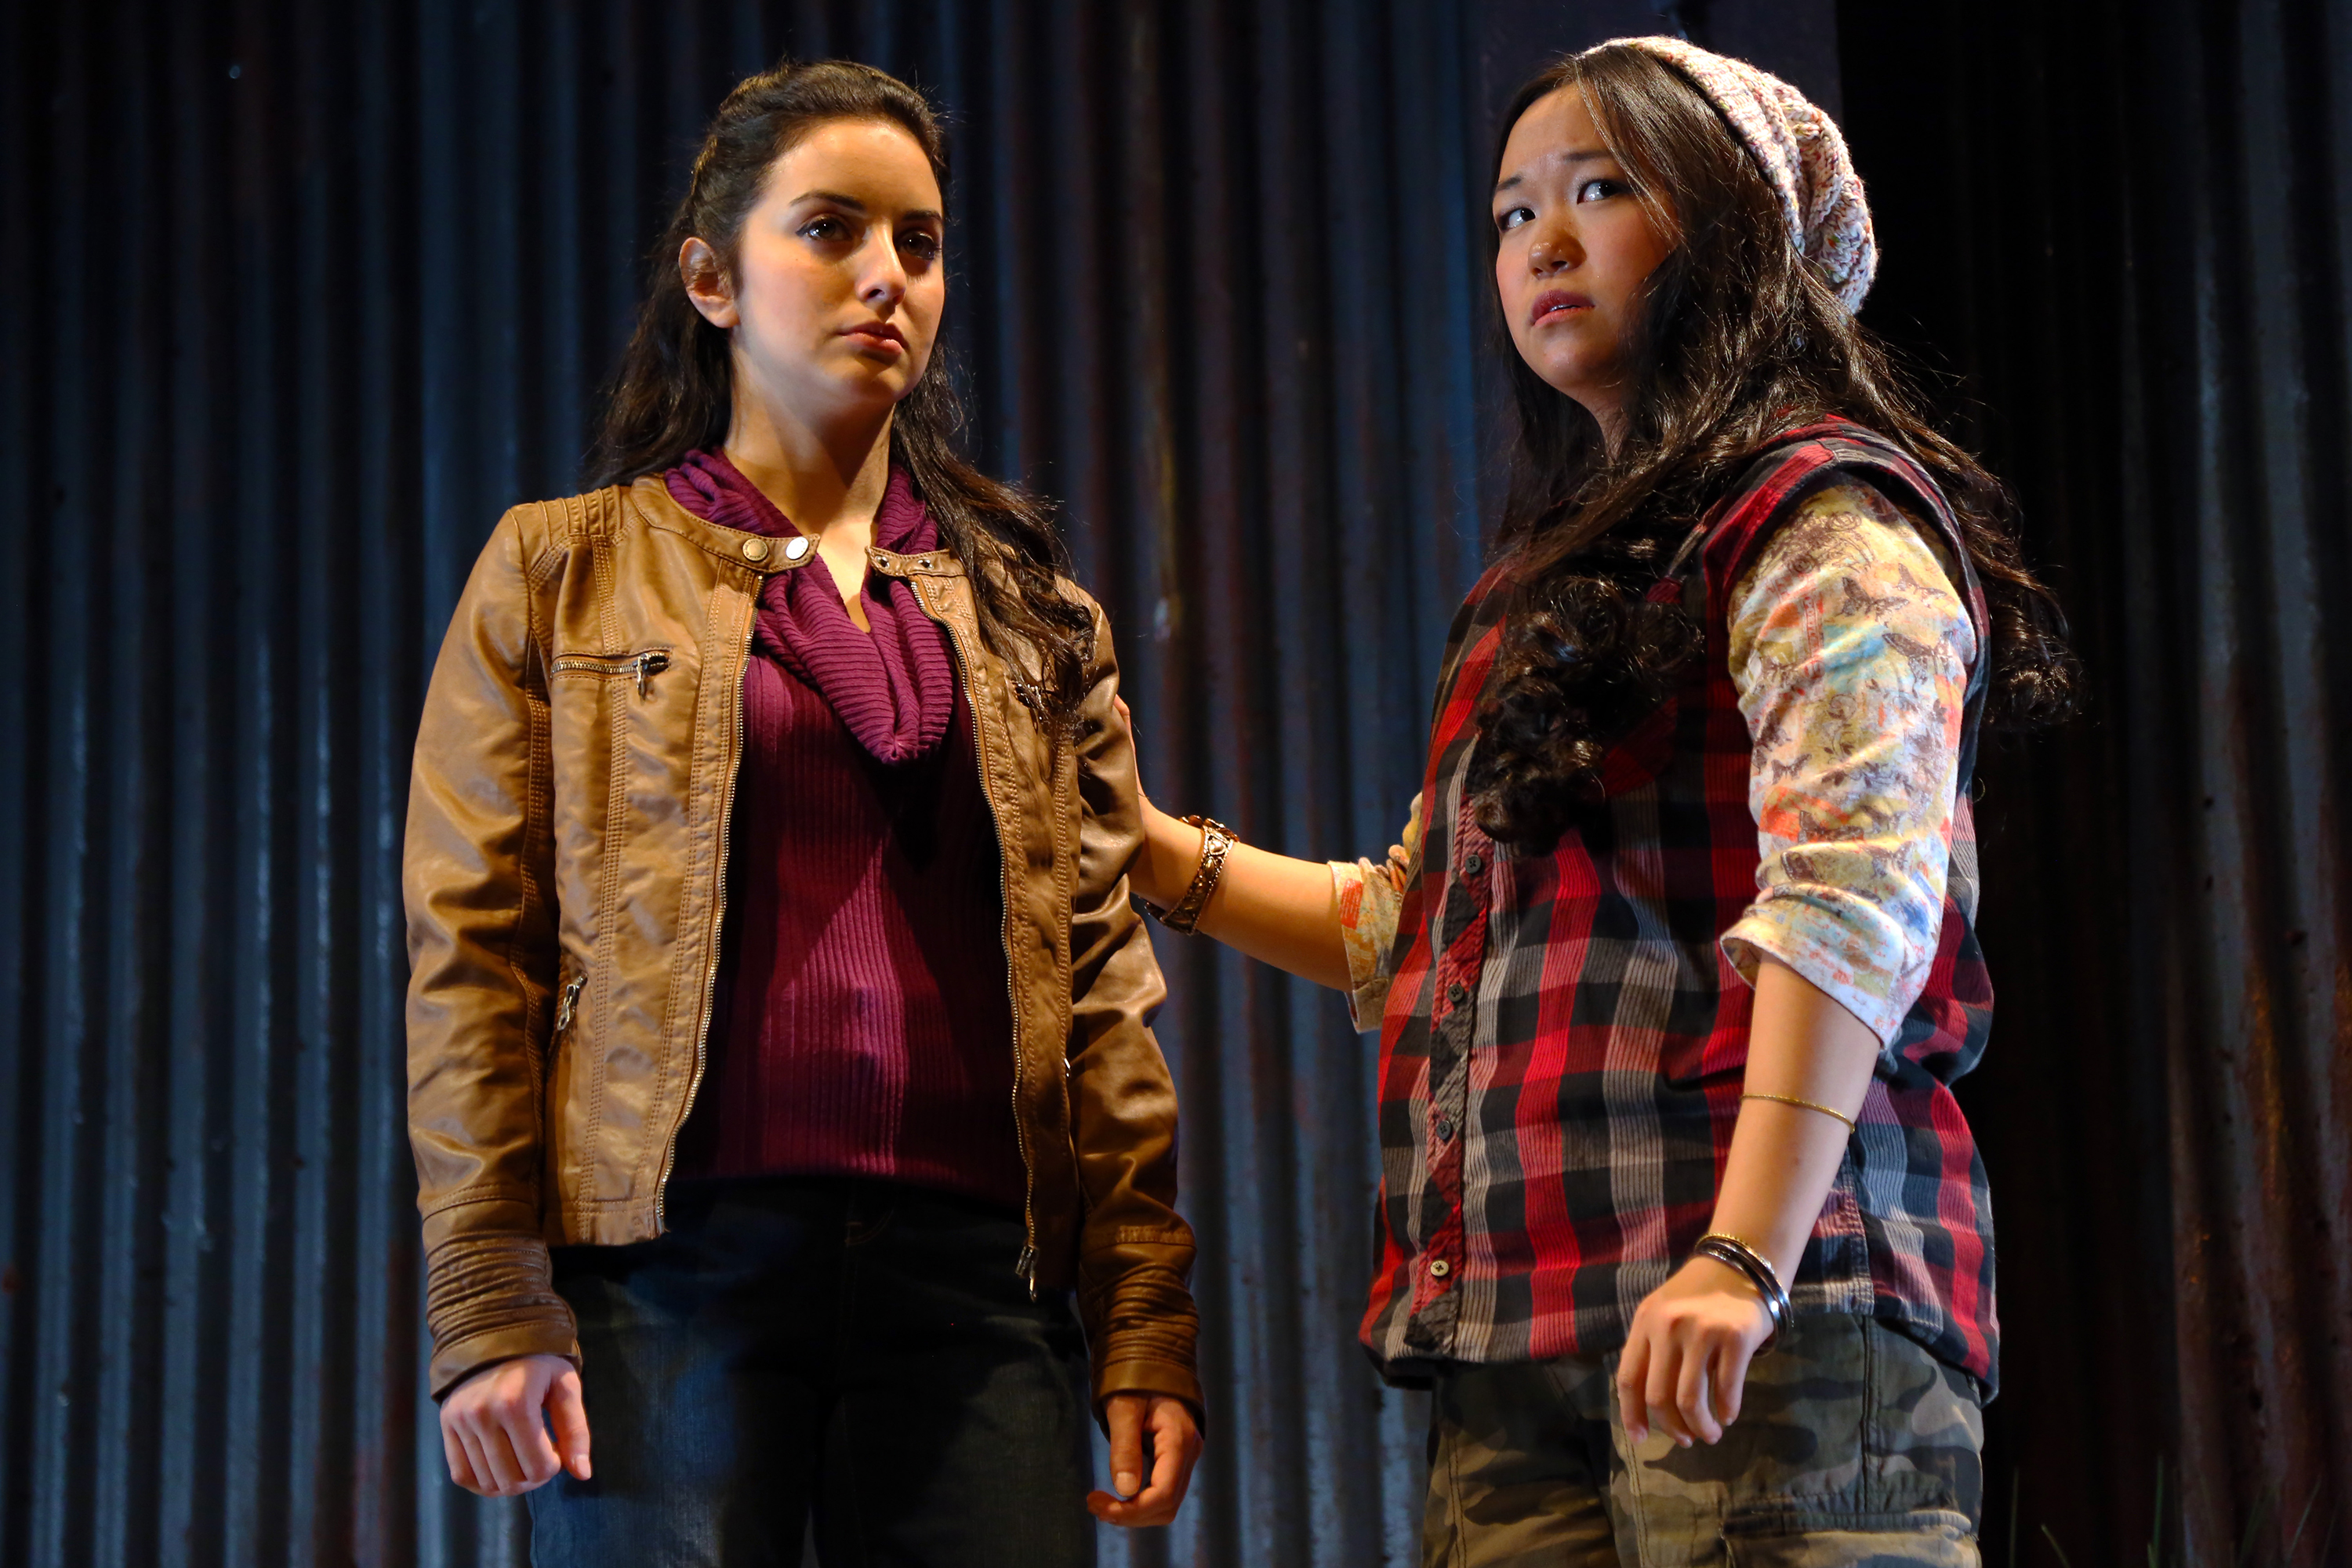 Rebekah Berger, BFA Acting ’19 and Pearl Matteson, BFA Acting ’19 in NUEVO CALIFORNIA by Bernardo Solano and Allan Havis, onstage through Nov 6, 2016 in Connecticut Repertory Theatre’s Studio Theatre. (Gerry Goodstein for UConn)